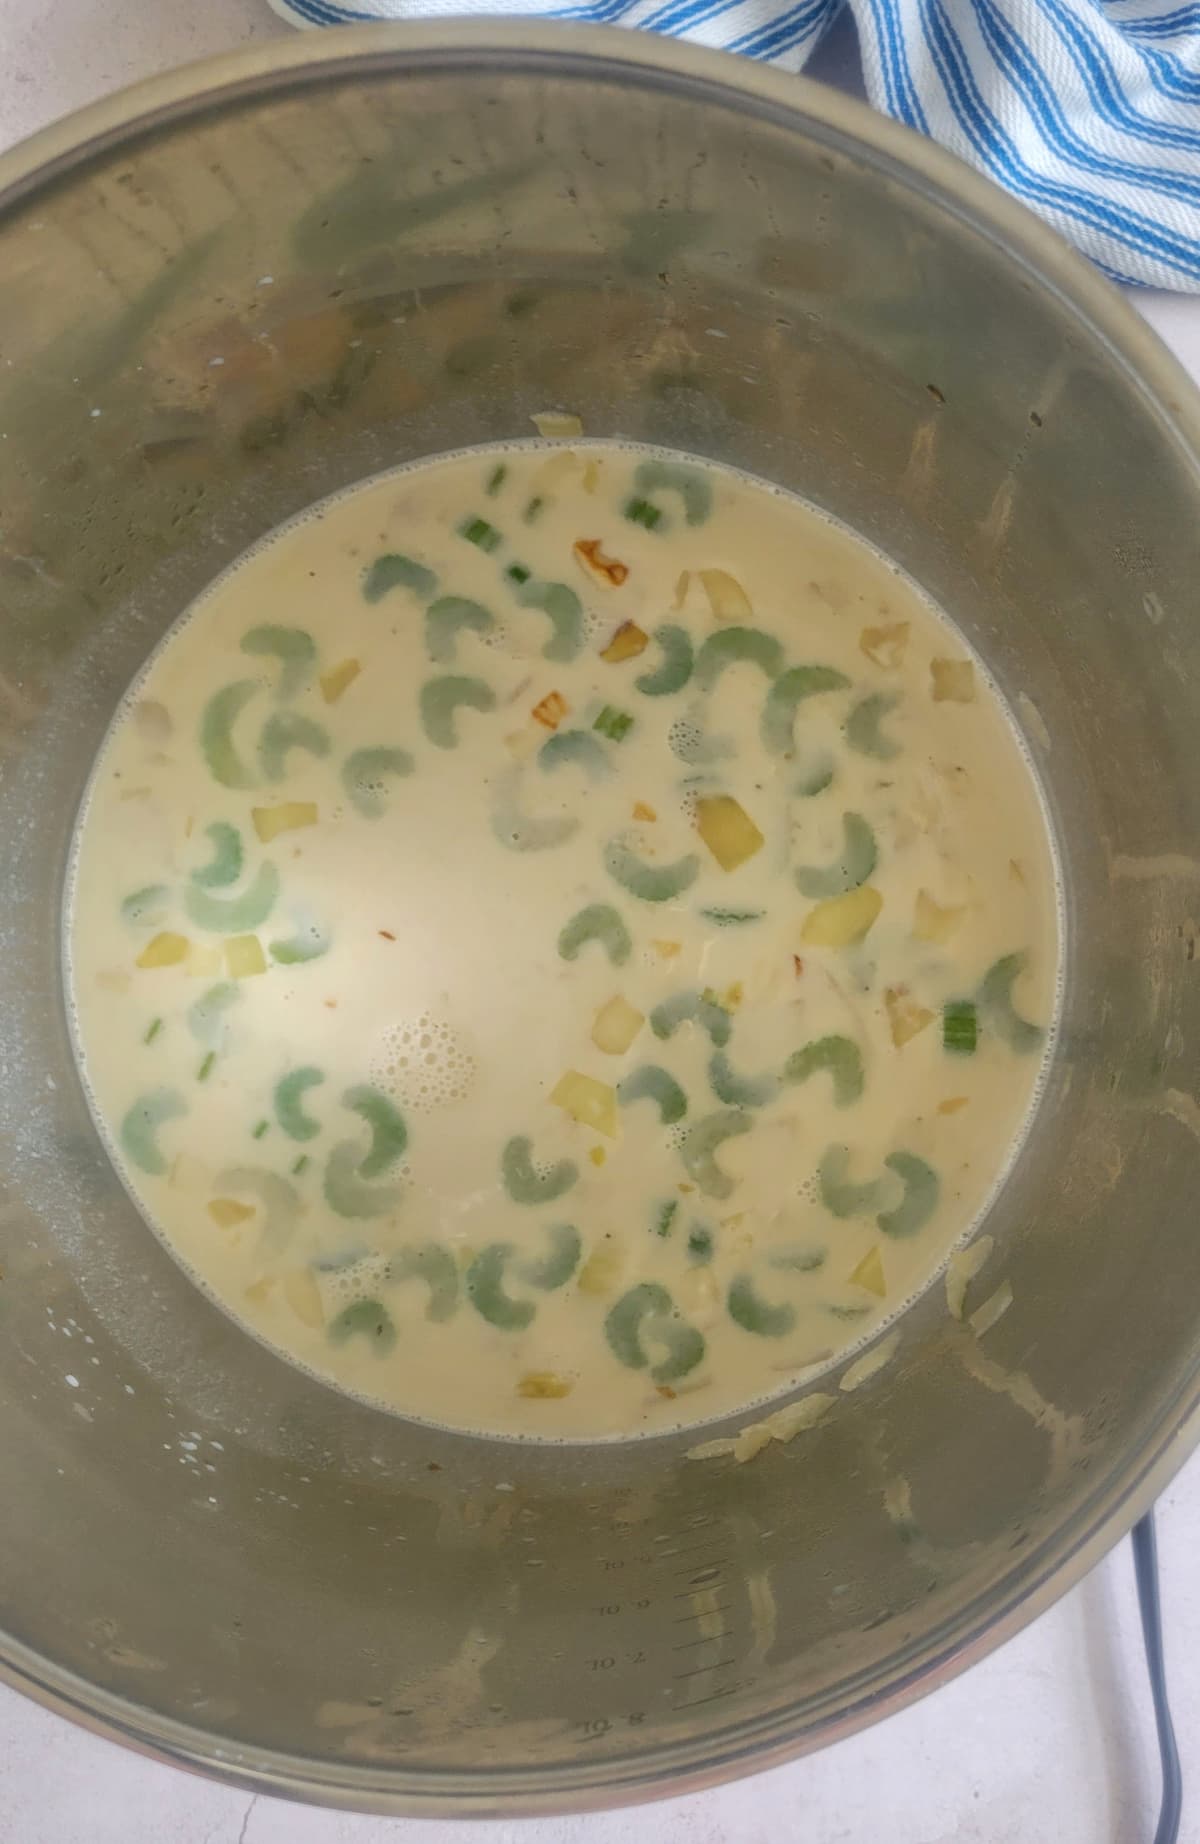 diced celery and veggies in a pot with cream